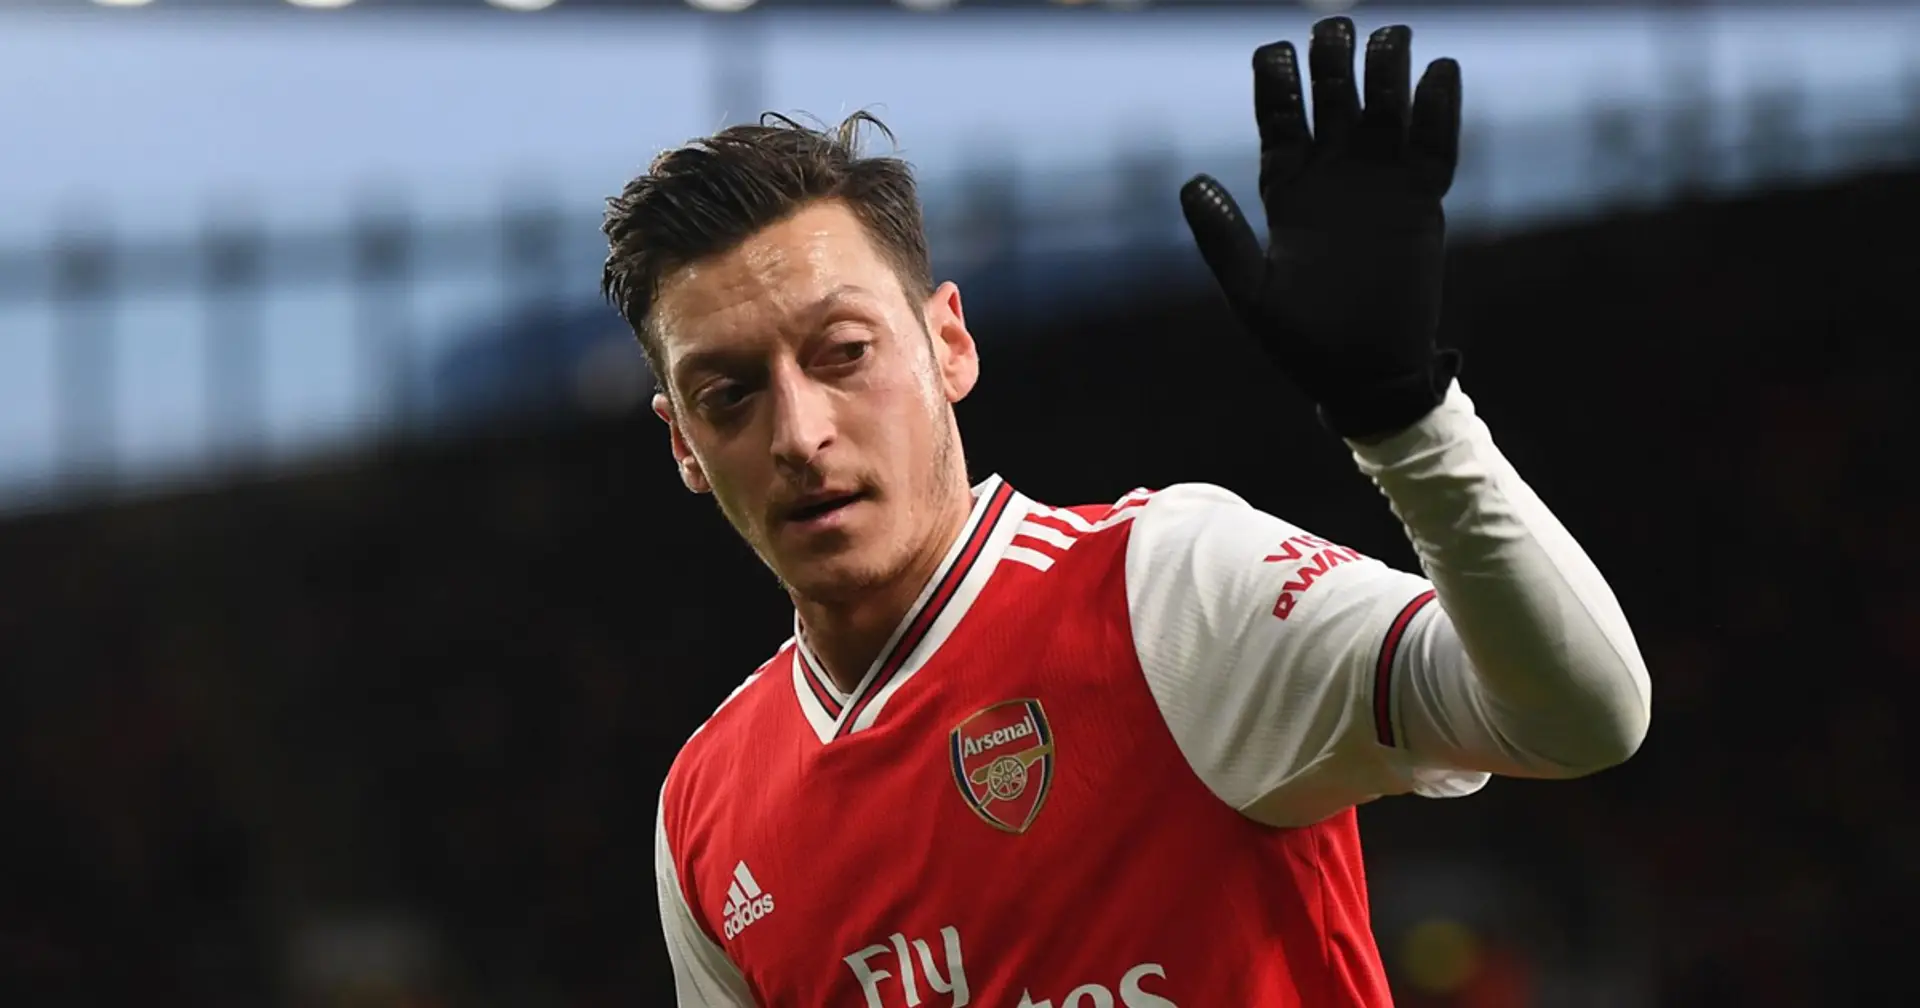 Vermaelen: 'Ozil is a world-class player ... But creativity is not the only thing in football'